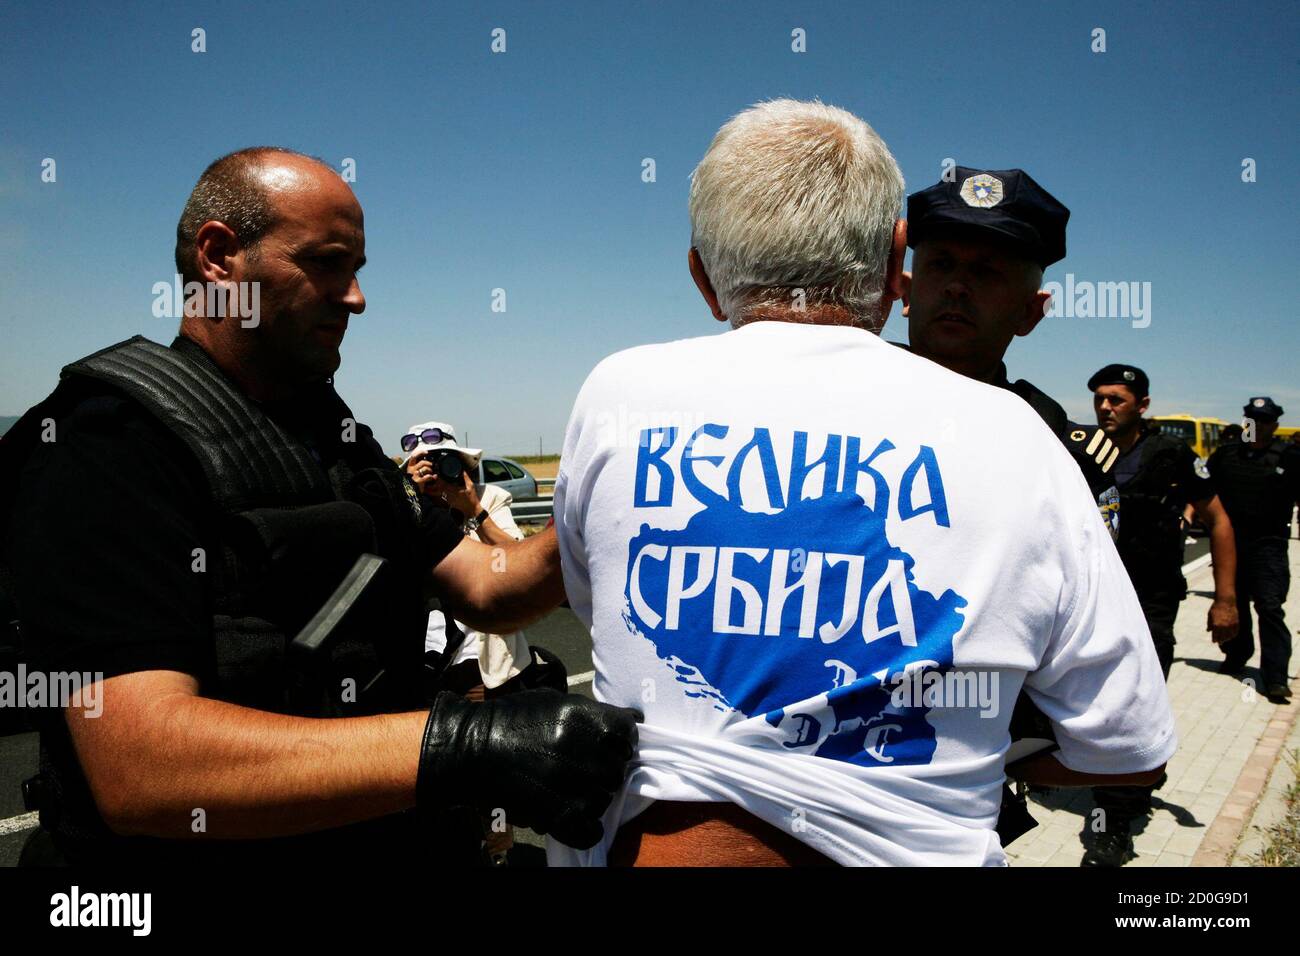 Police arrest a Serb wearing a t-shirt with the words that read, "Great  Serbia" during a celebration commemorating the anniversary of the 1389  Battle of Kosovo at Gazimestan, near the capital Pristina